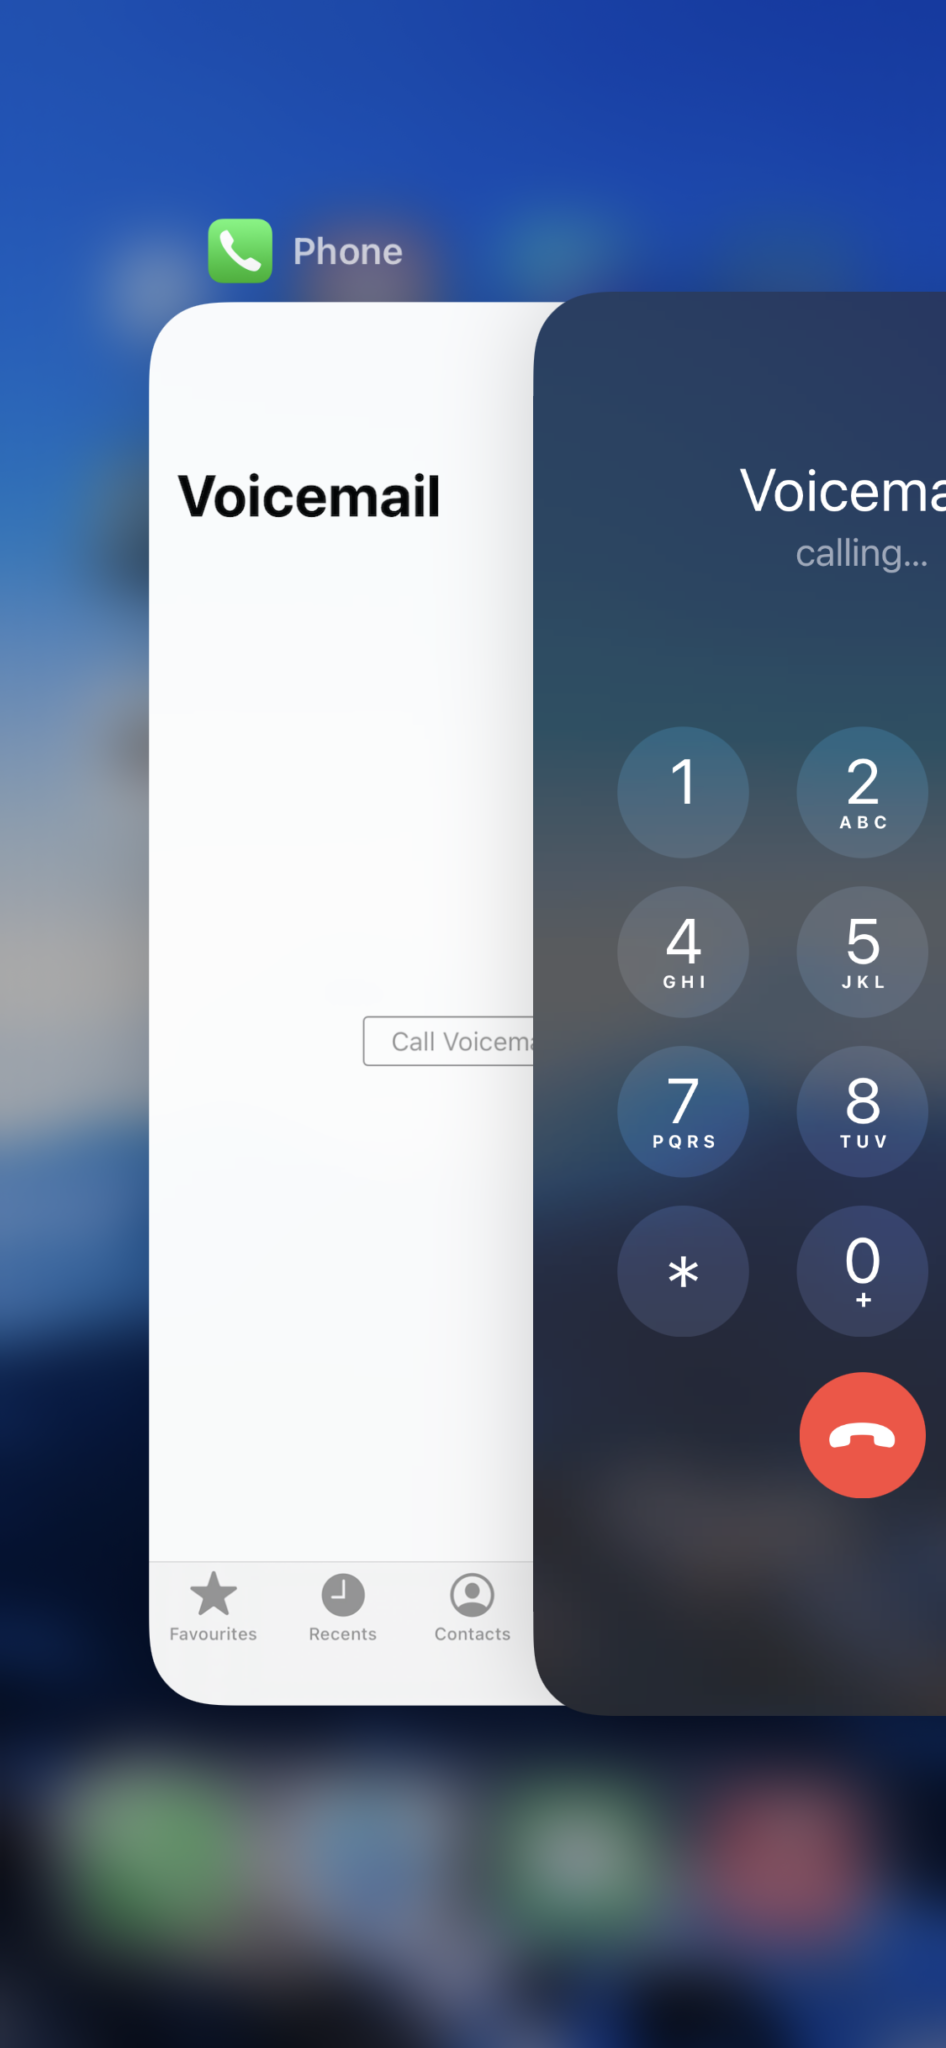 14 Tips To Fix iPhone Voicemail Not Working On iOS 14 or 15